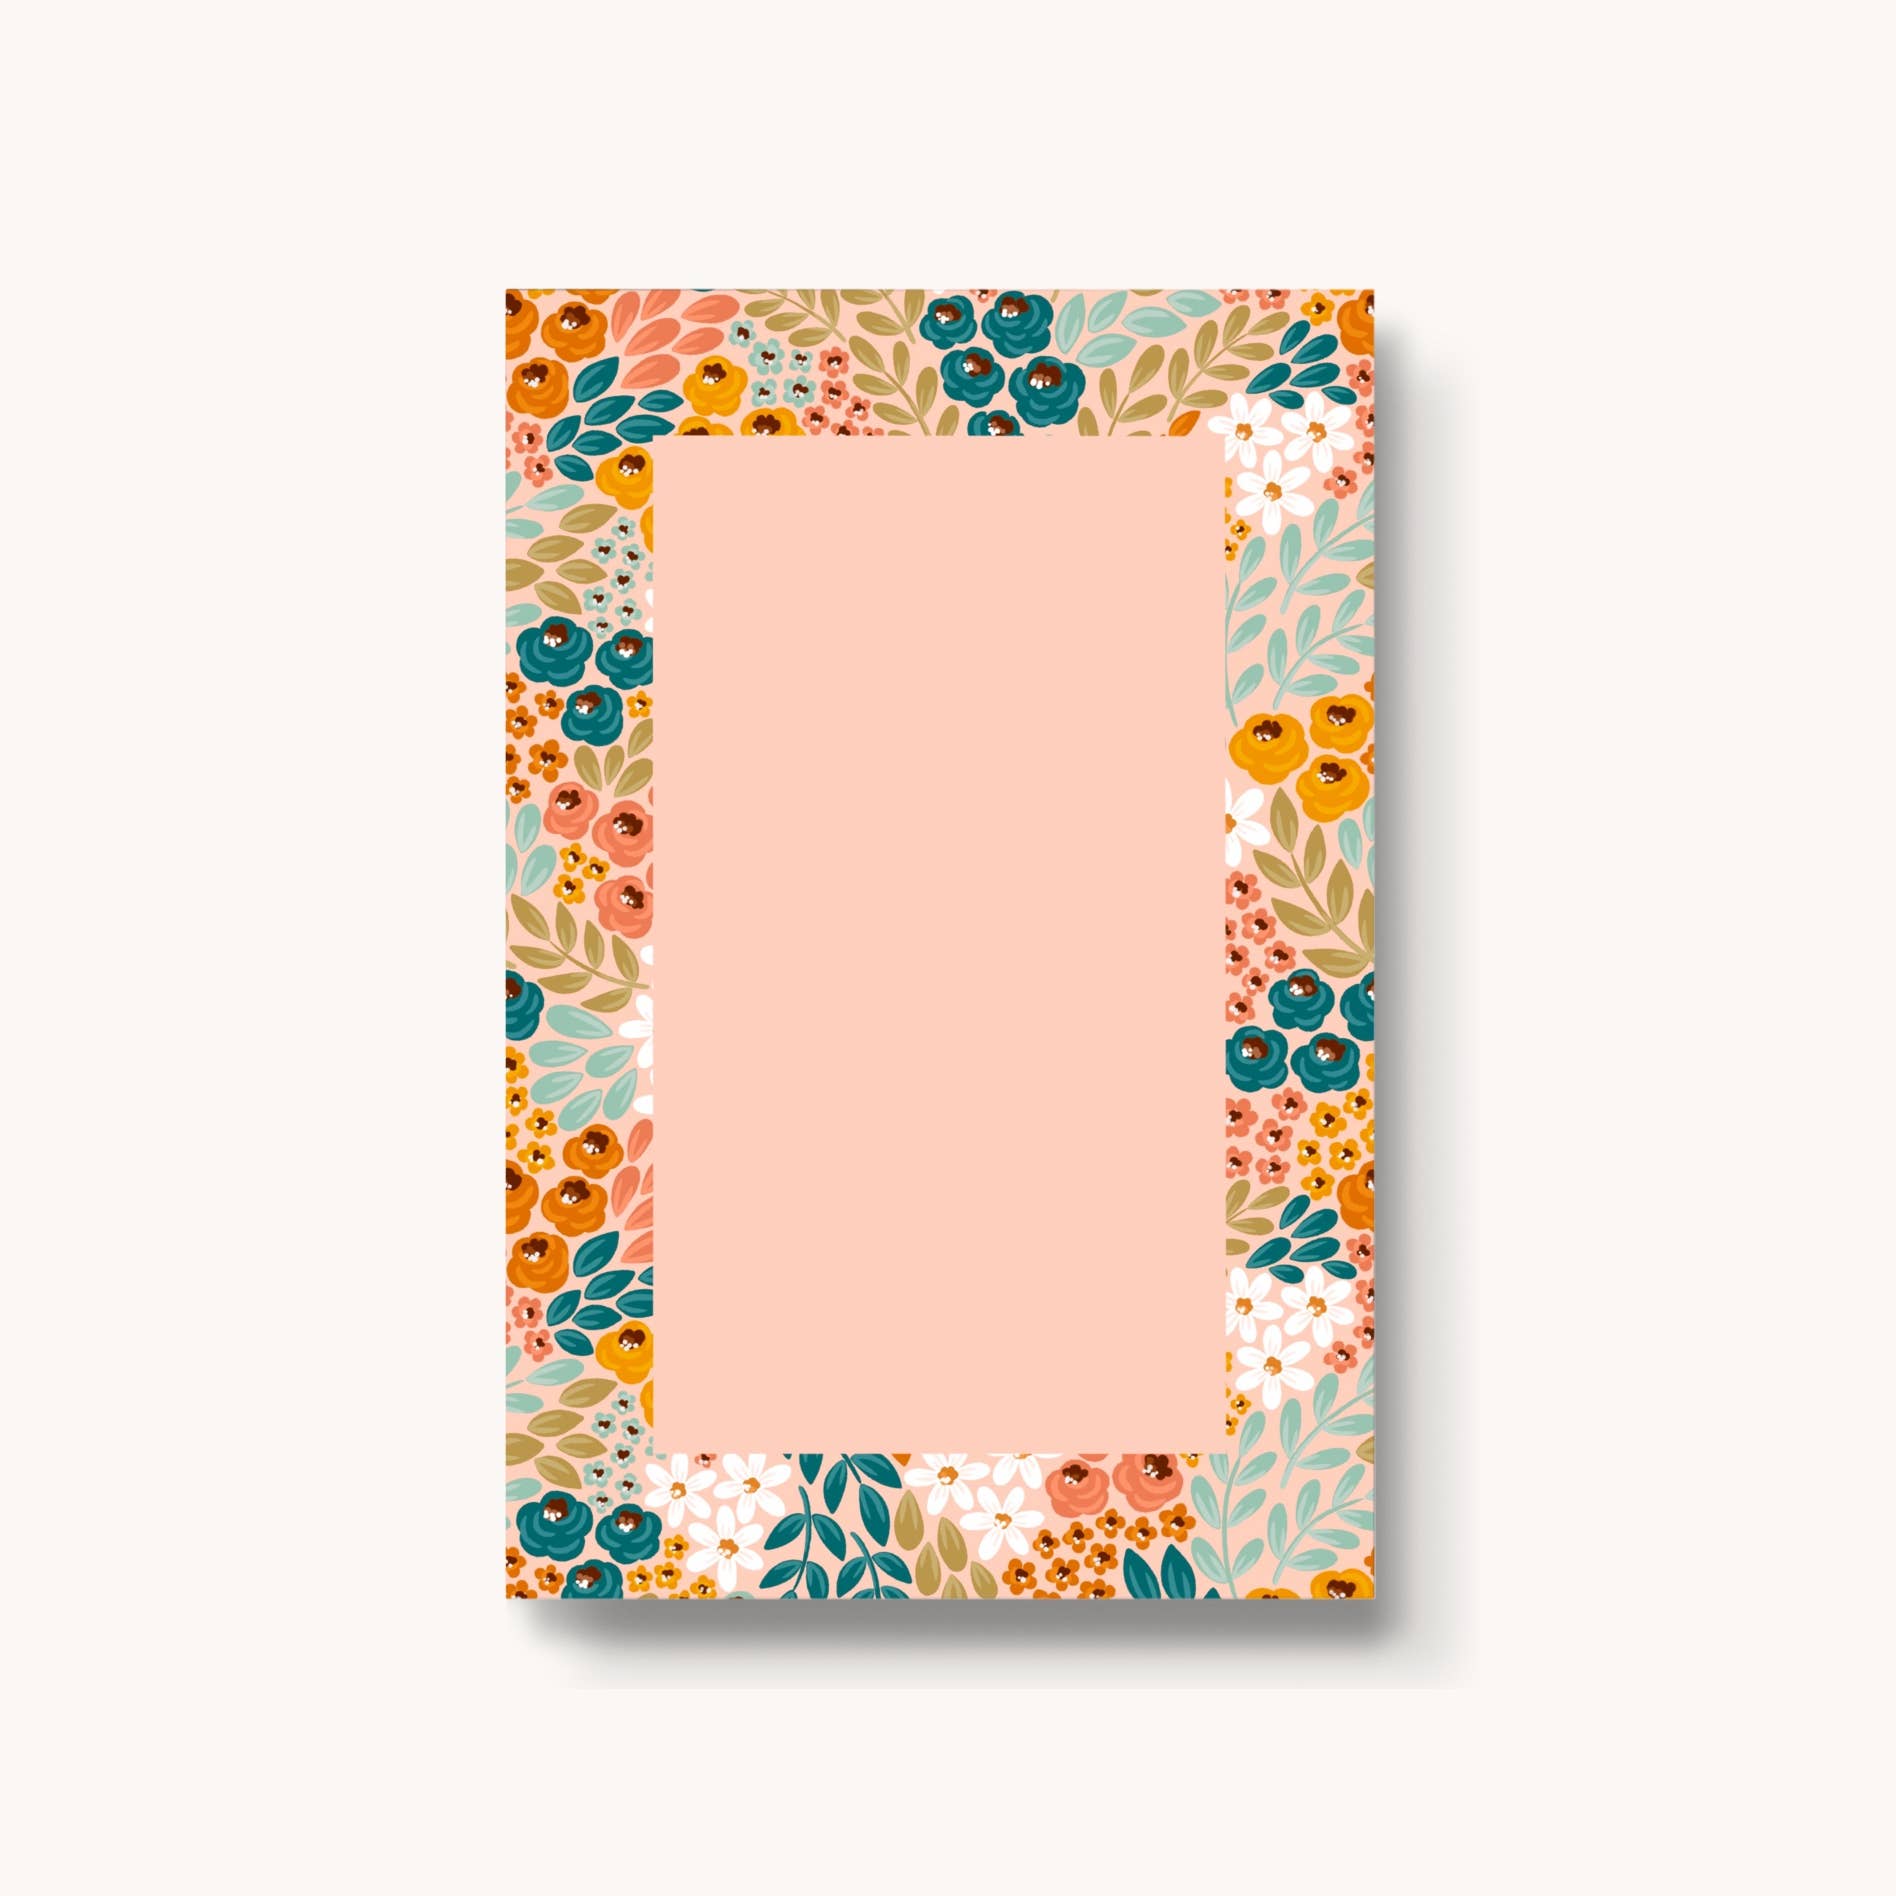 Honeysuckle Floral Notepad, 4x6 in.